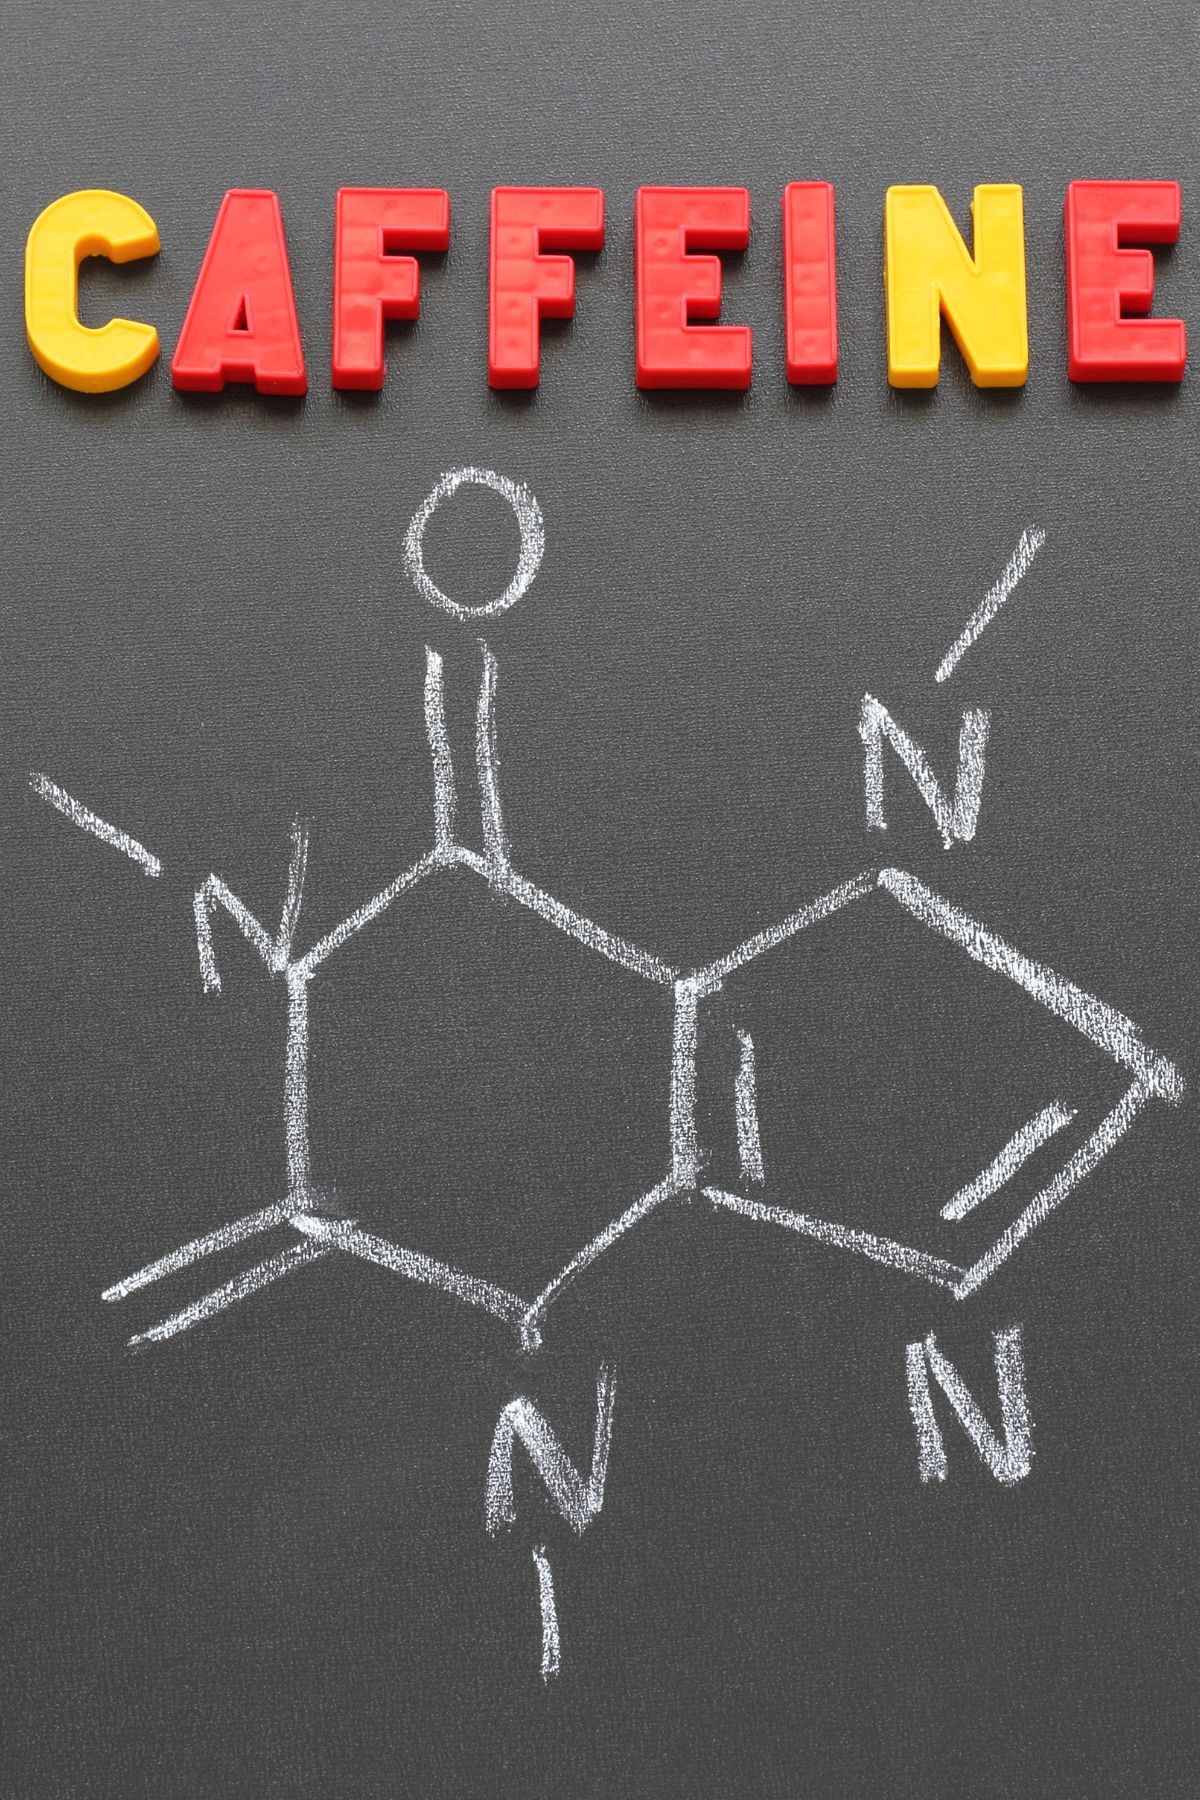 the compound structure of caffeine drawn on a chalk board.